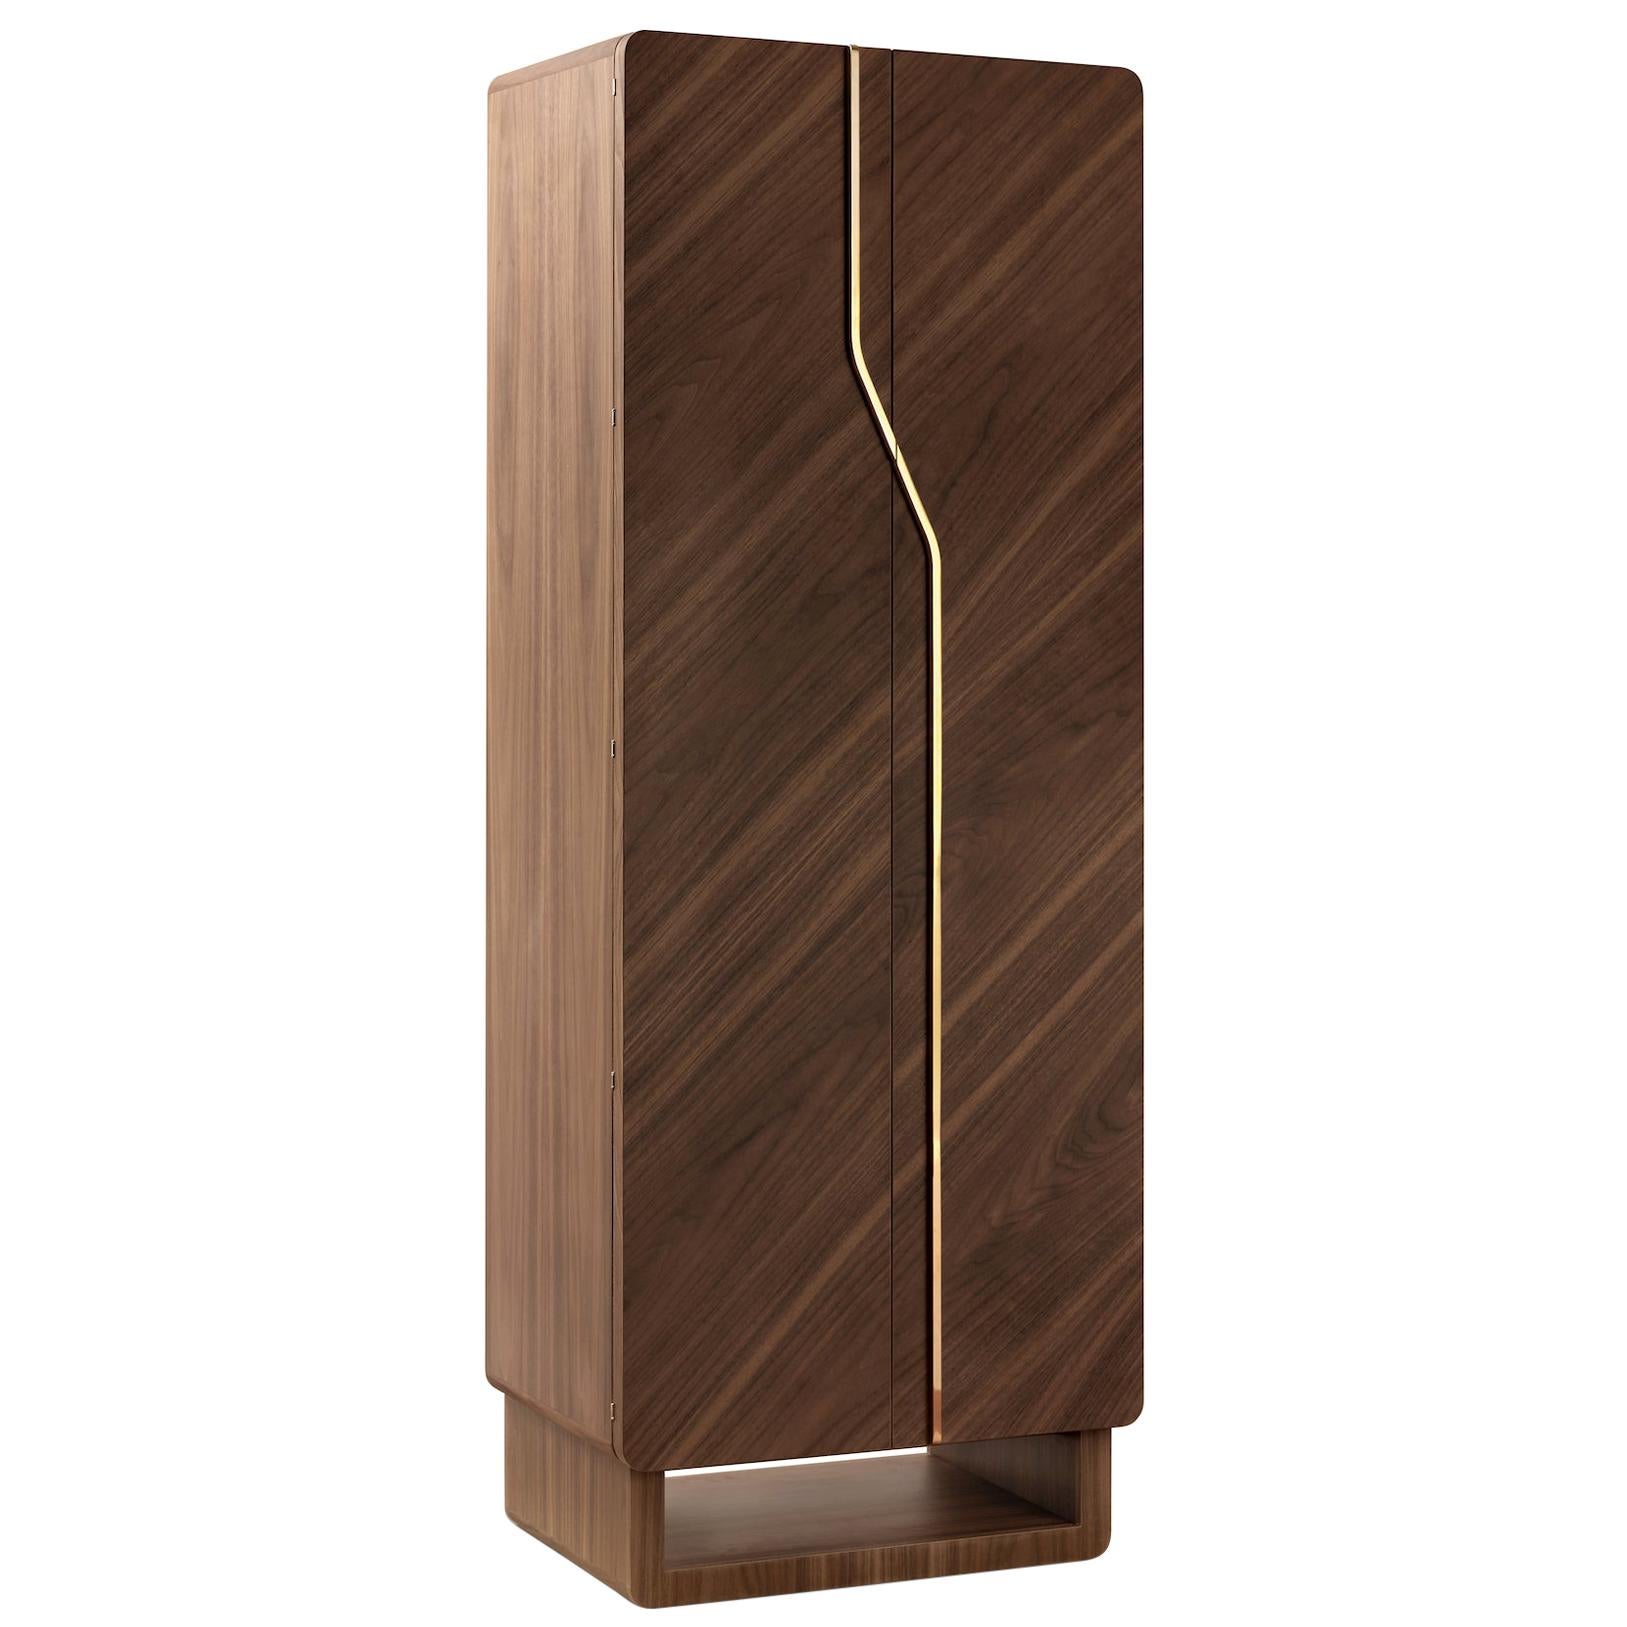 Polished walnut contemporary armored armoire by Agresti.

Matte finish, 4-karat gold-plated accessories. Round handle with biometric opening device and emergency key integrated. Inside pull out necklace holder and drawers lined for jewelry. Secret